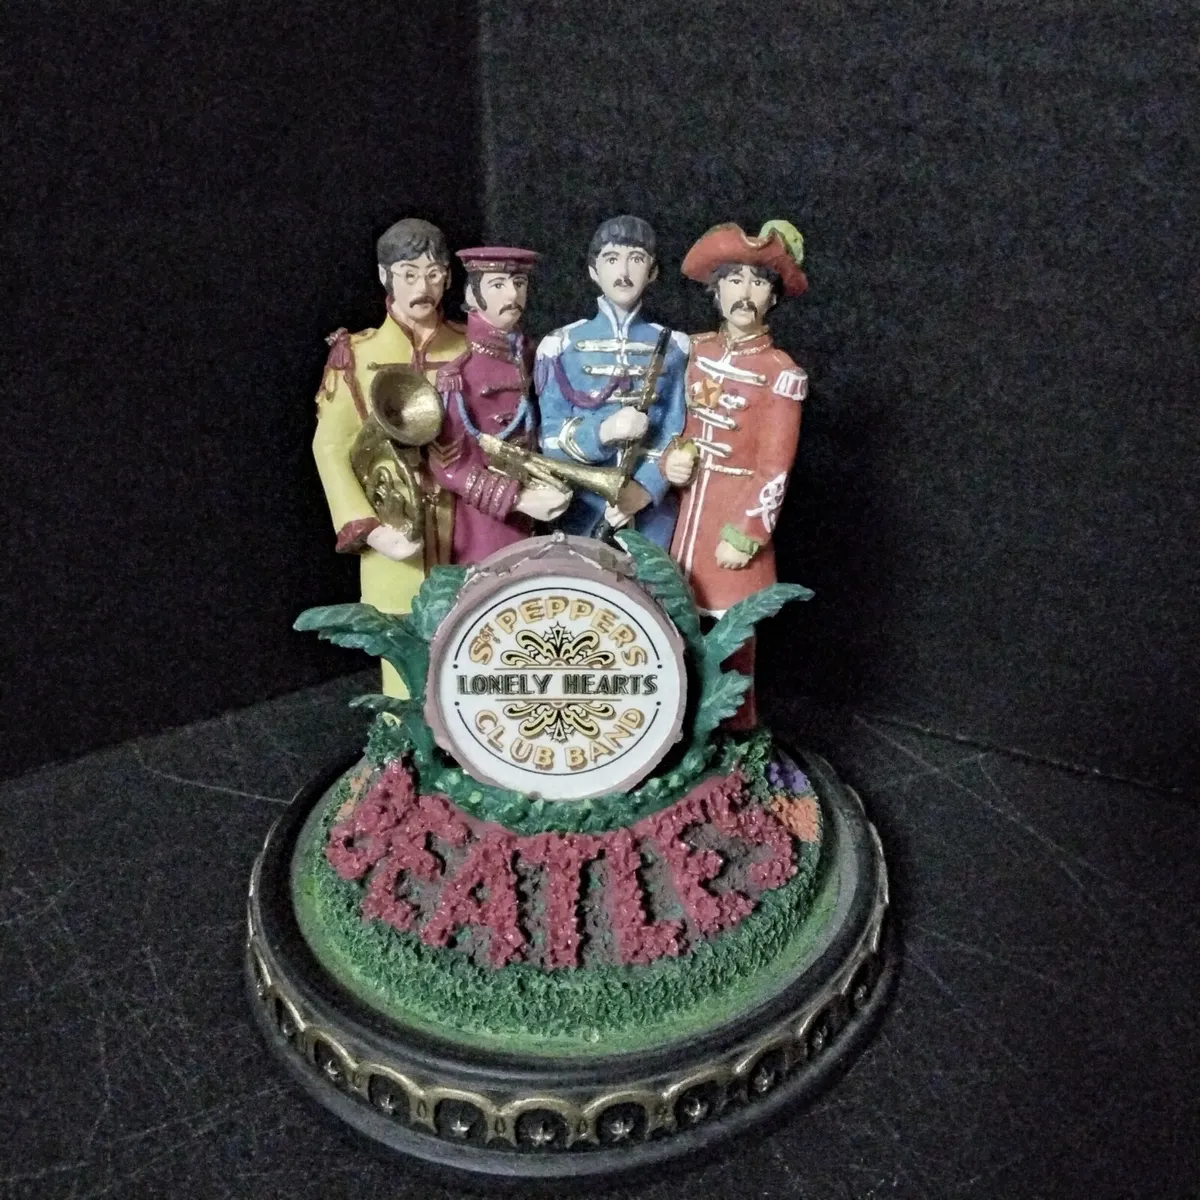 1993 FRANKLIN MINT BEATLES SGT PEPPERS LONELY HEARTS CLUB BAND MUSIC BOX